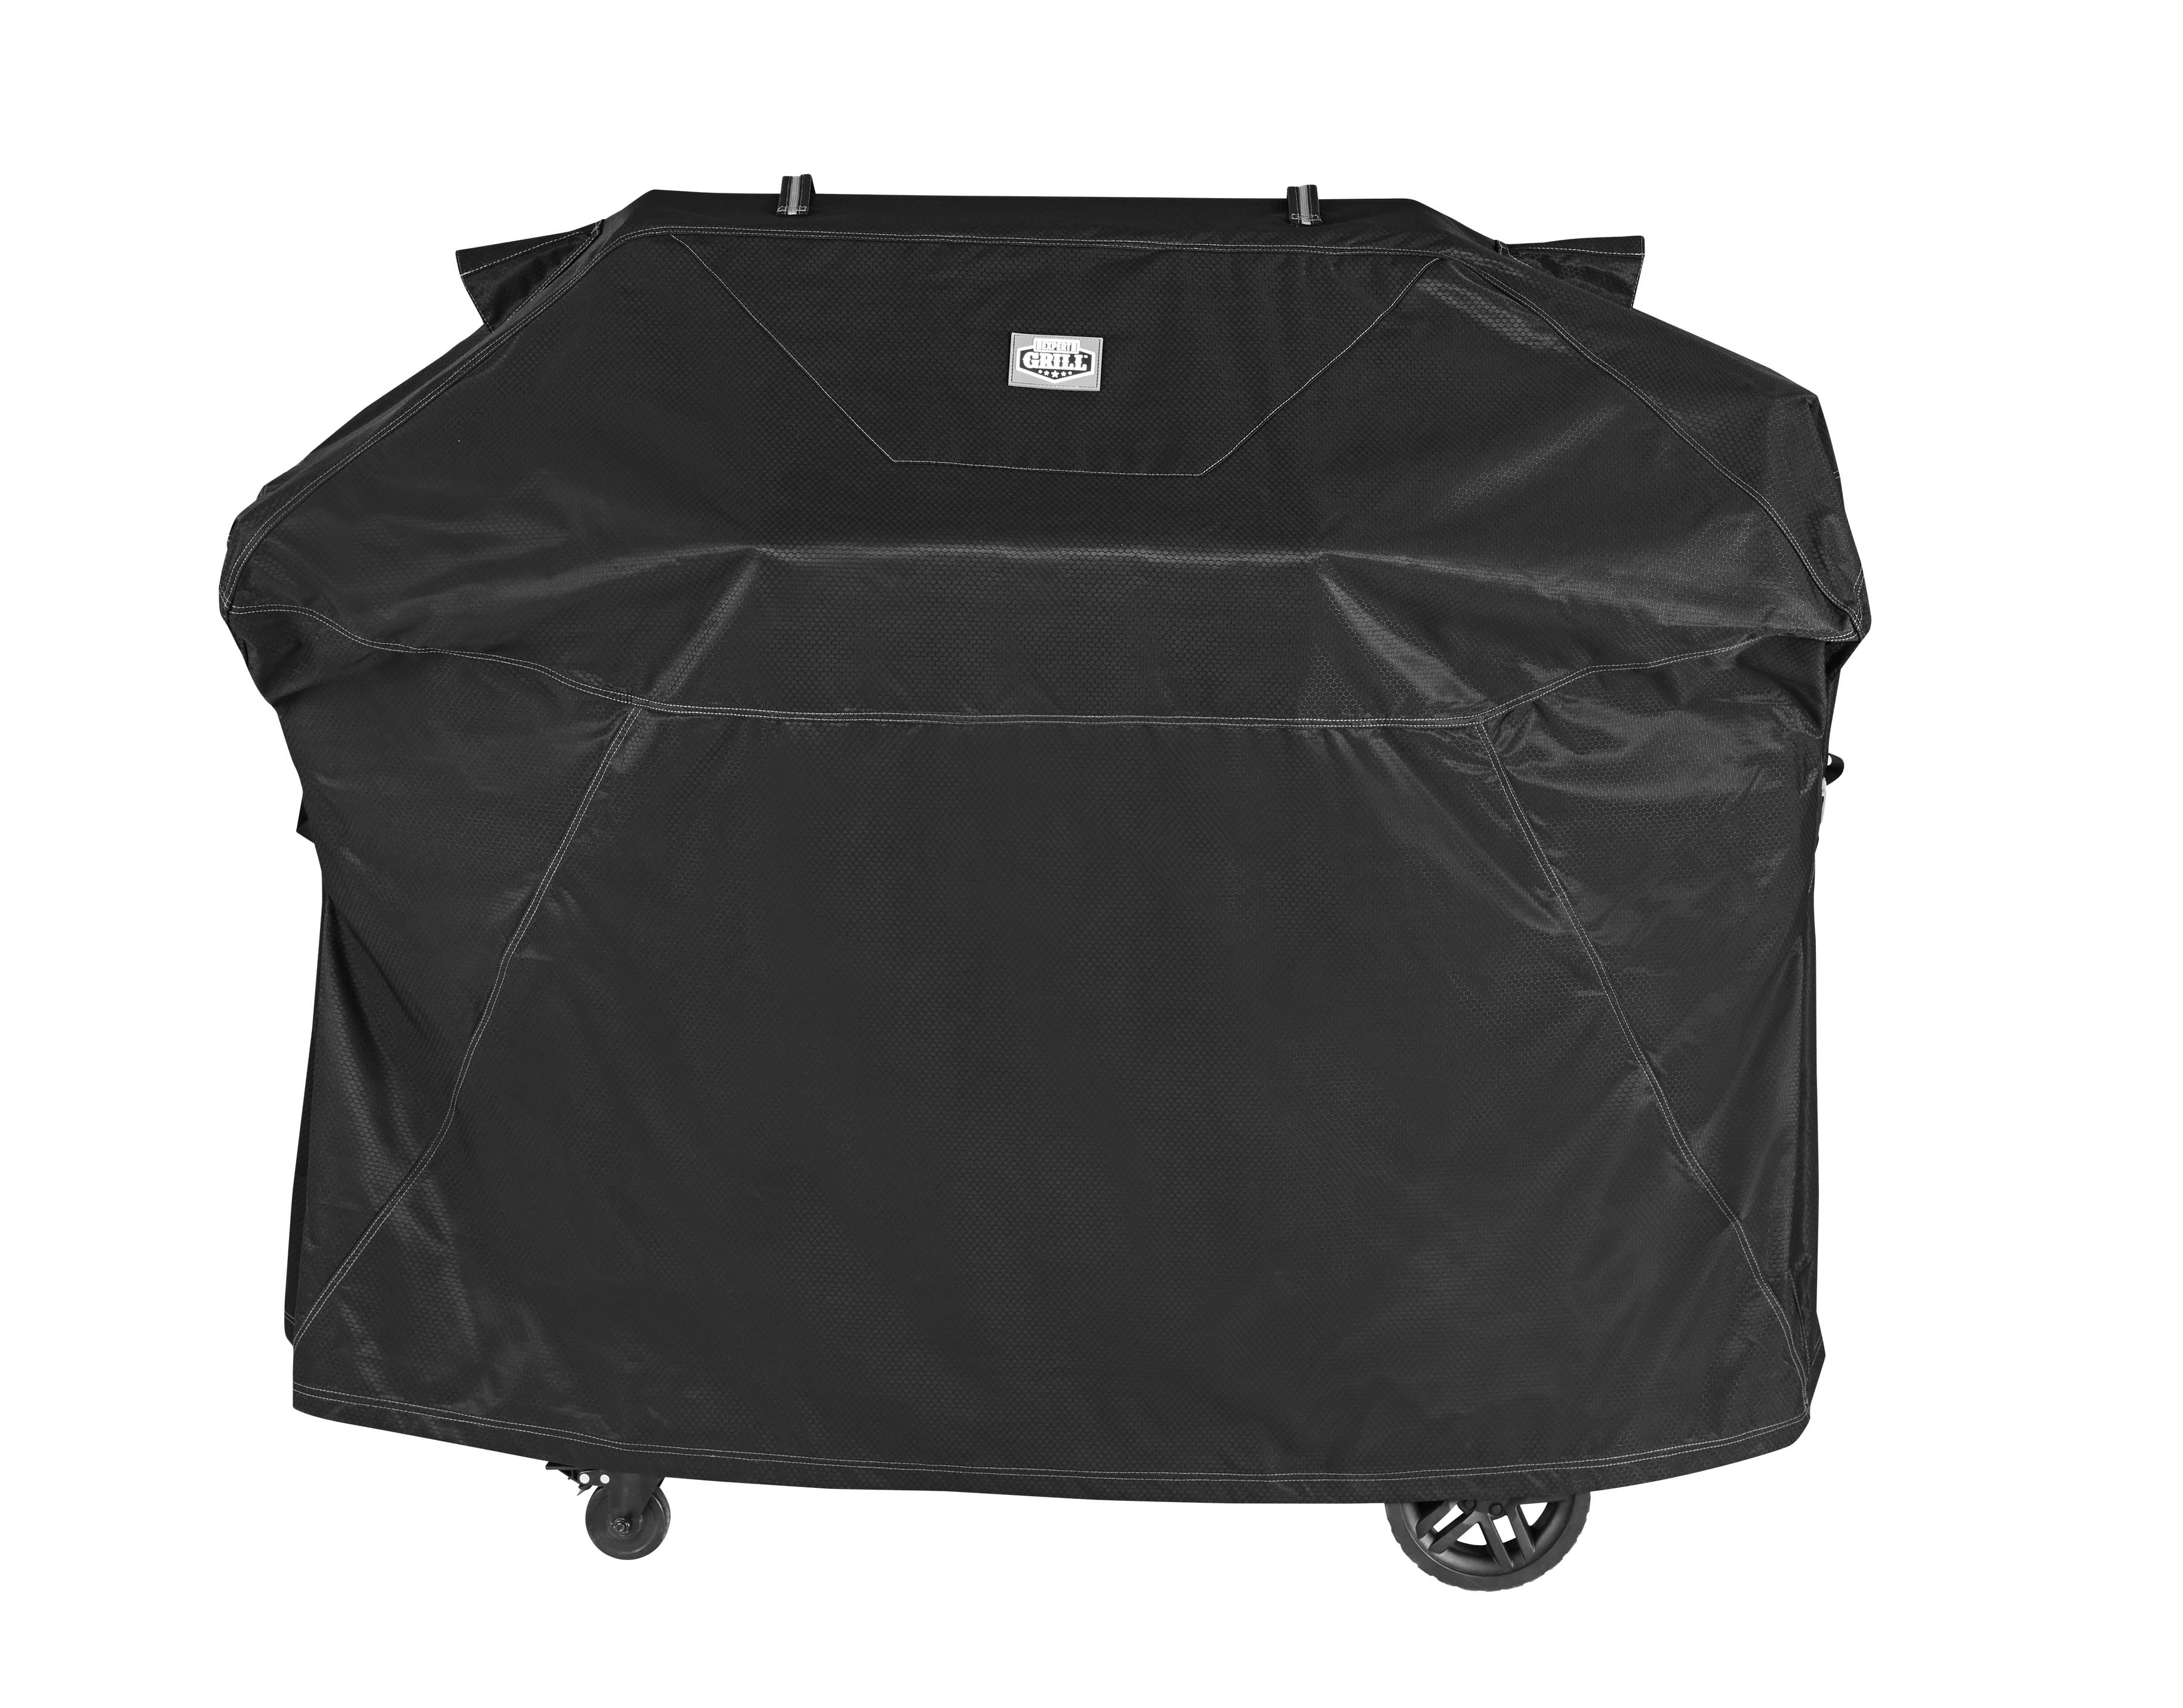 Expert Grill 30 Inch Grill Cover Smoker All Weather Strong 